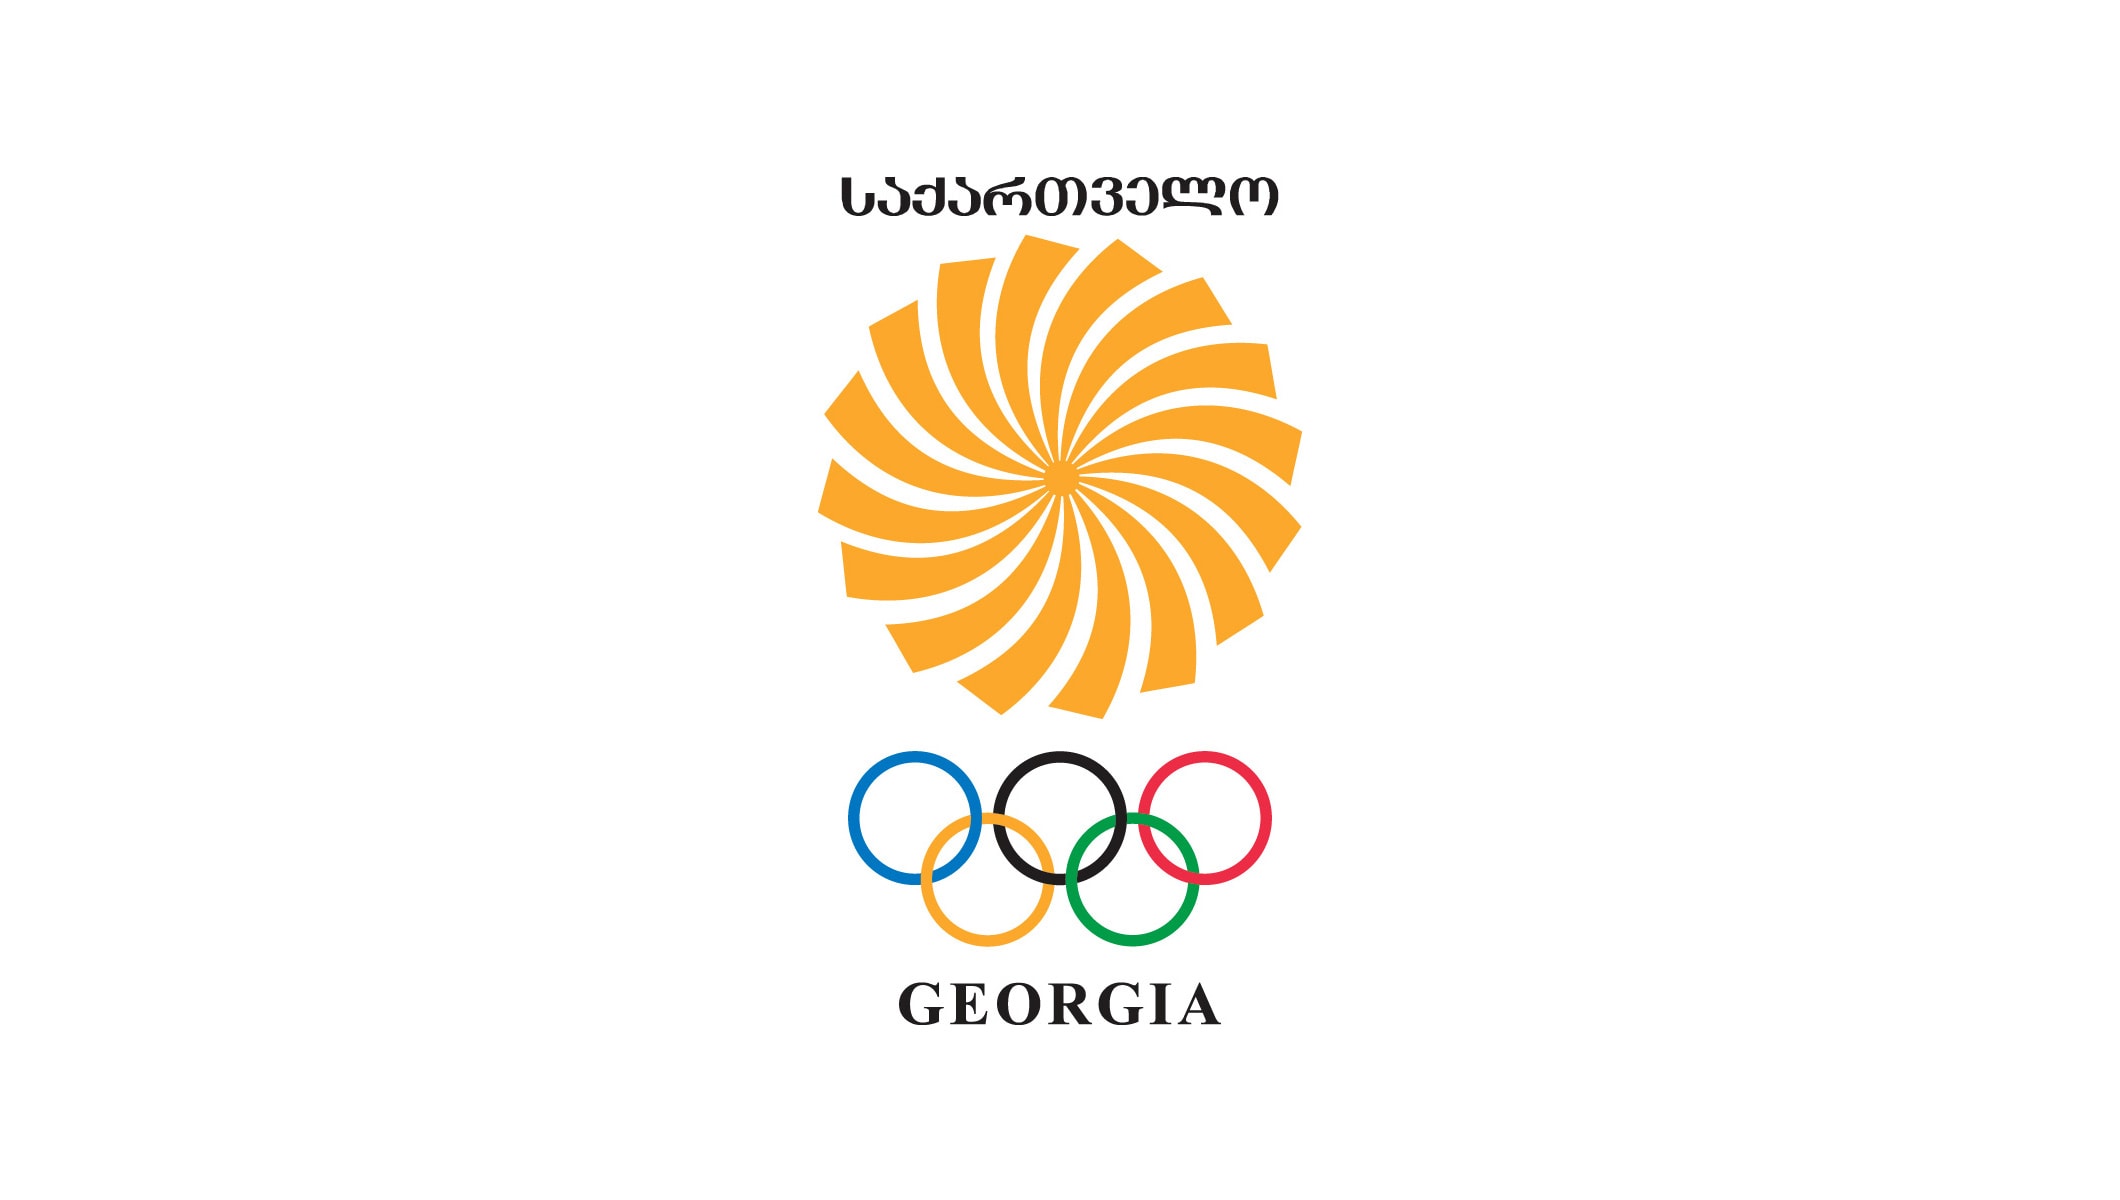 National Olympic Committee (NOC)